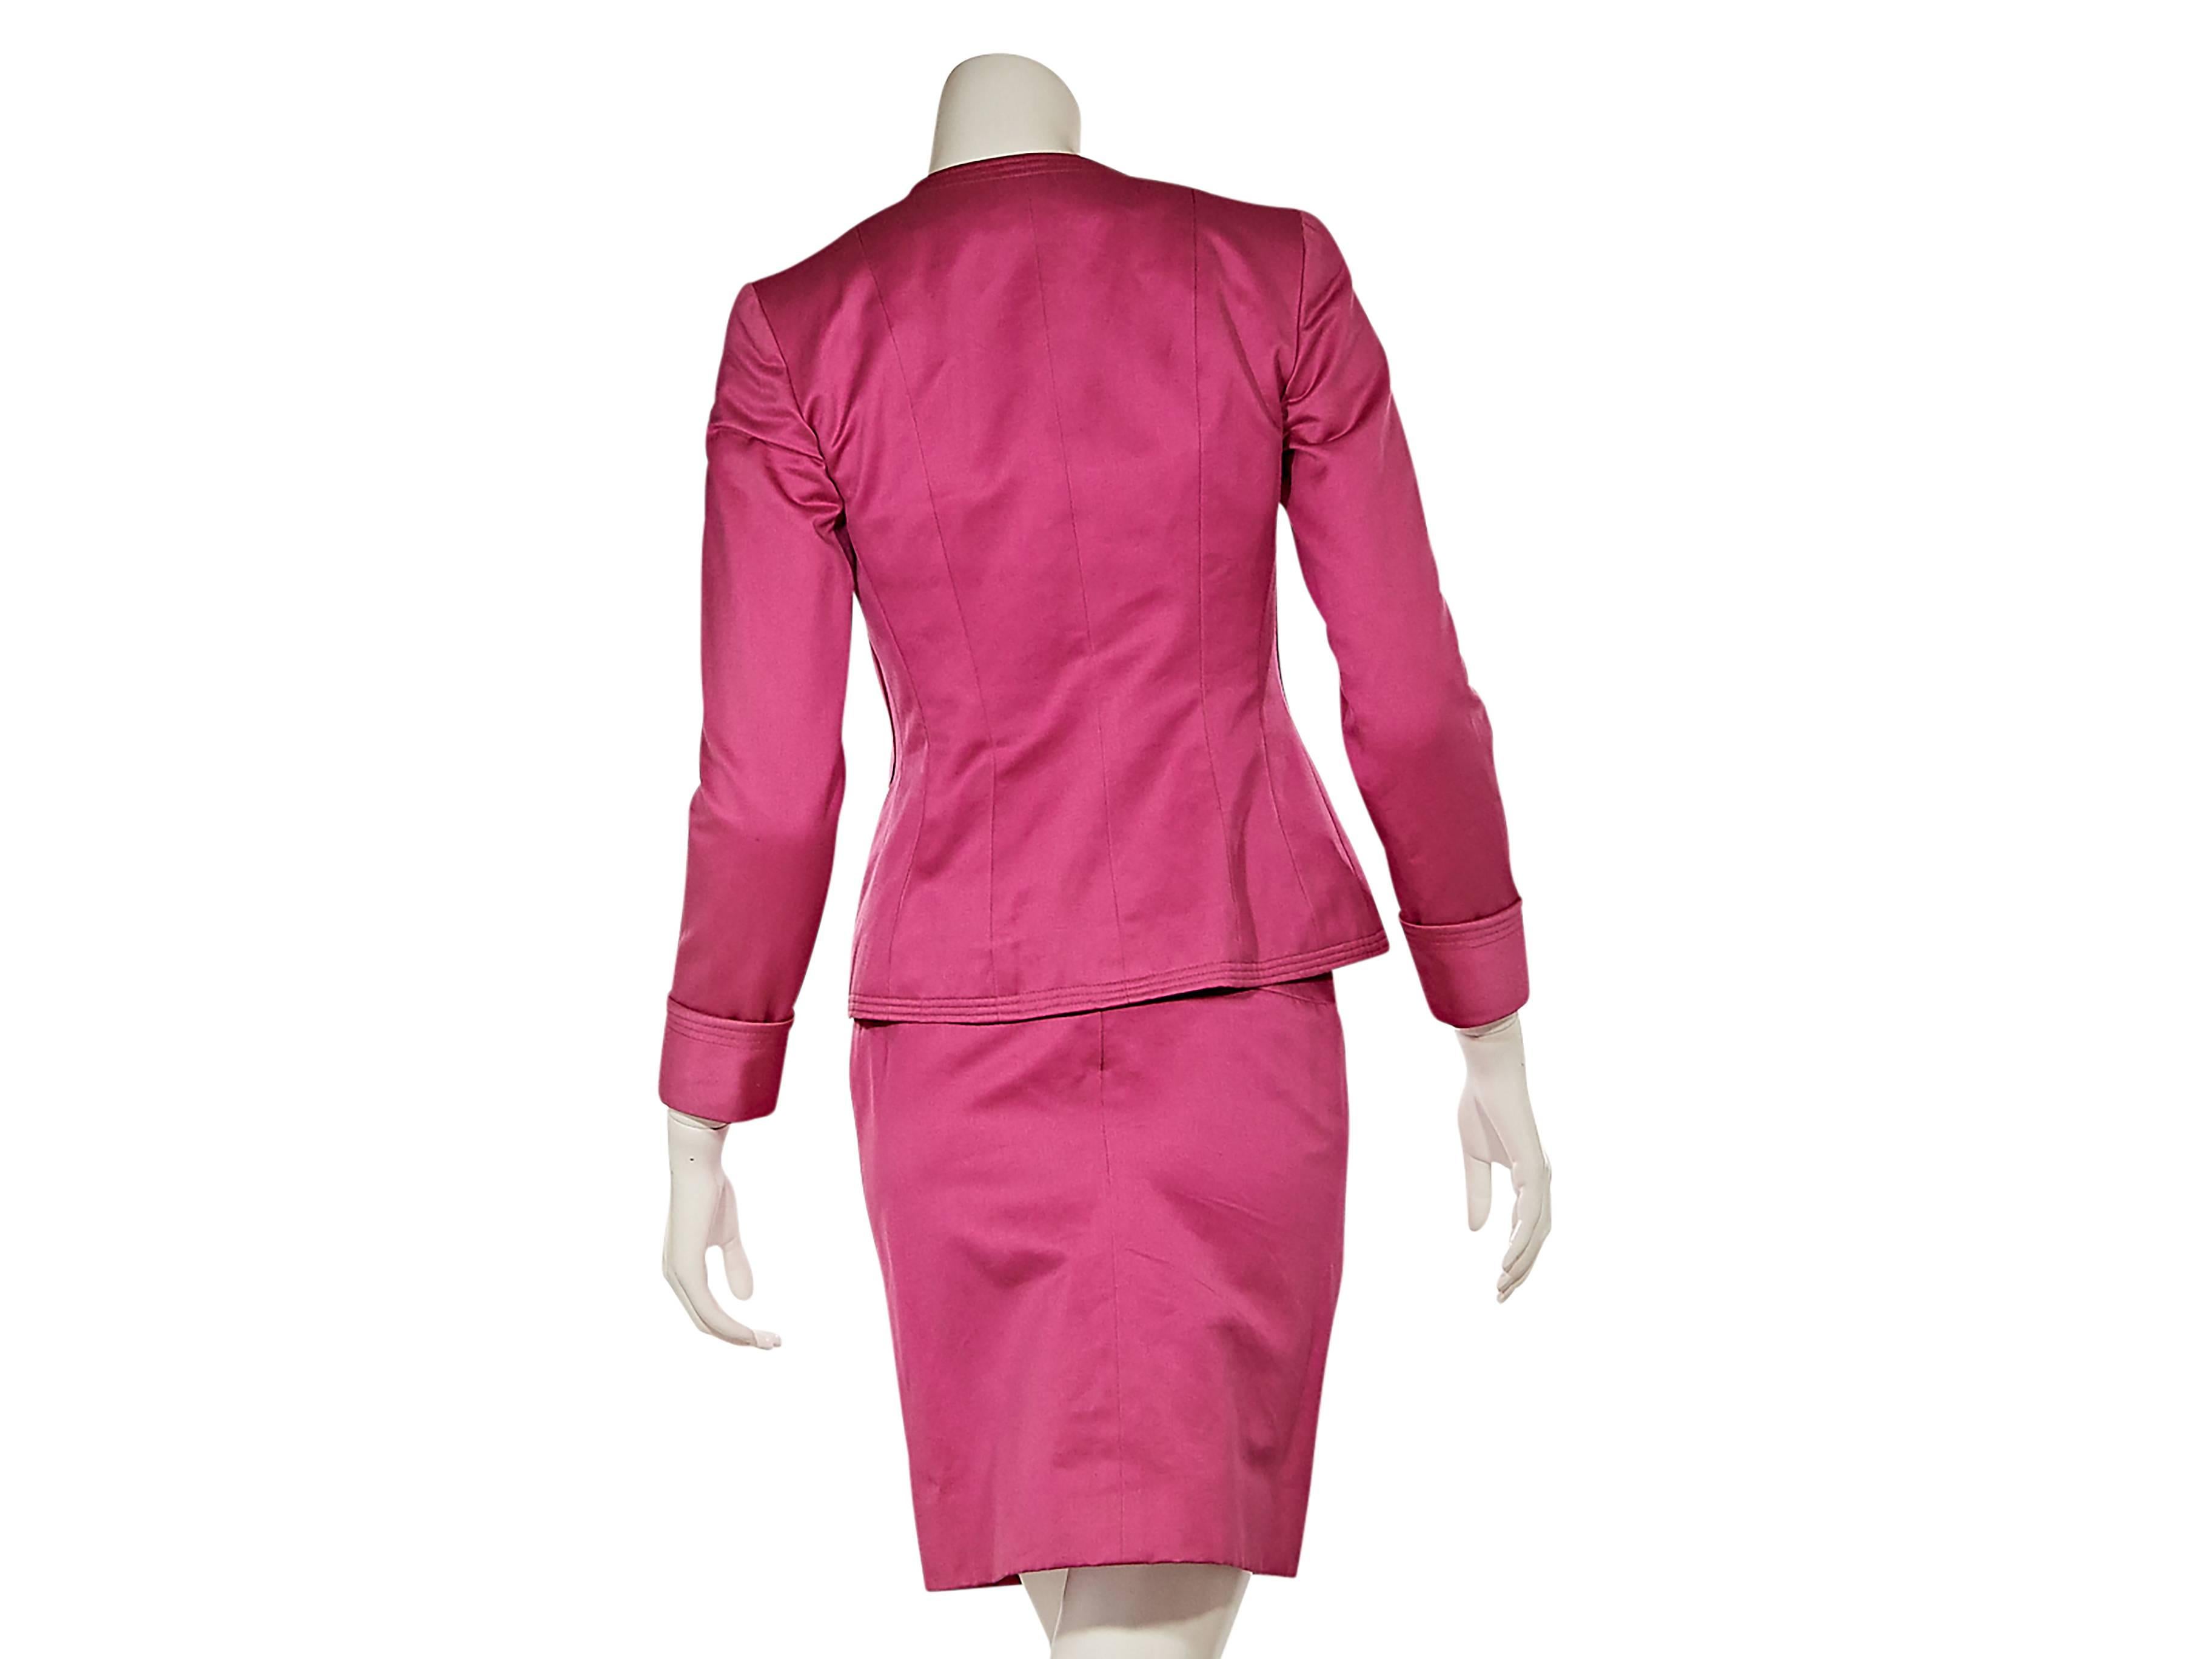 Product details:  Hot pink cotton skirt suit set by Chanel.  Lapel-less jacket.  Open front.  Tow front patch pockets.  Matching pencil skirt.  Banded waist.   
Condition: Excellent.  